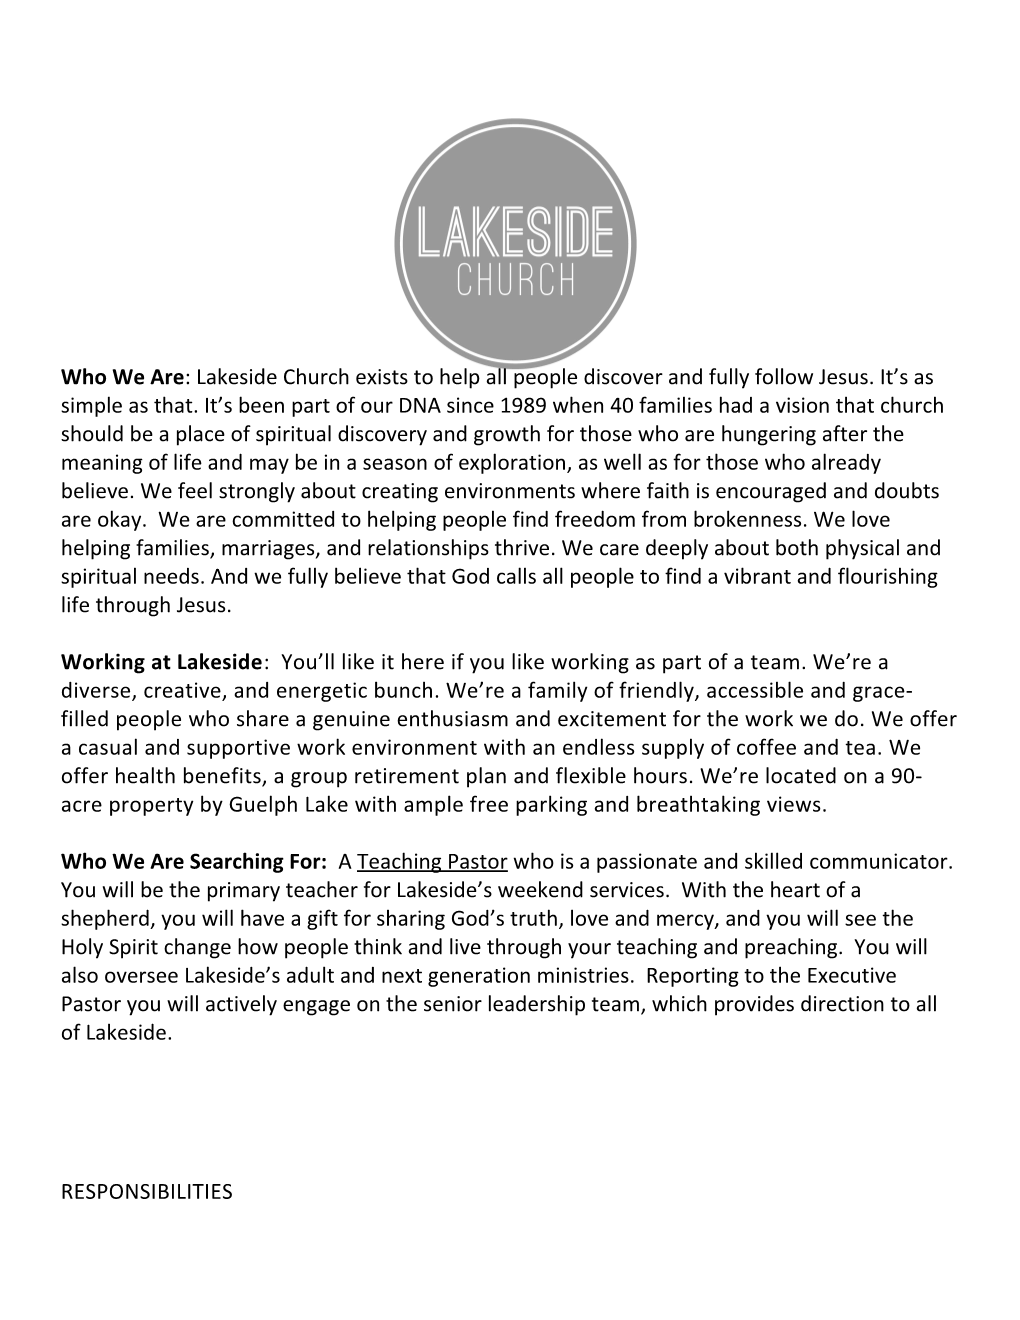 Working at Lakeside : You Ll Like It Here If You Like Working As Part of a Team. We Re